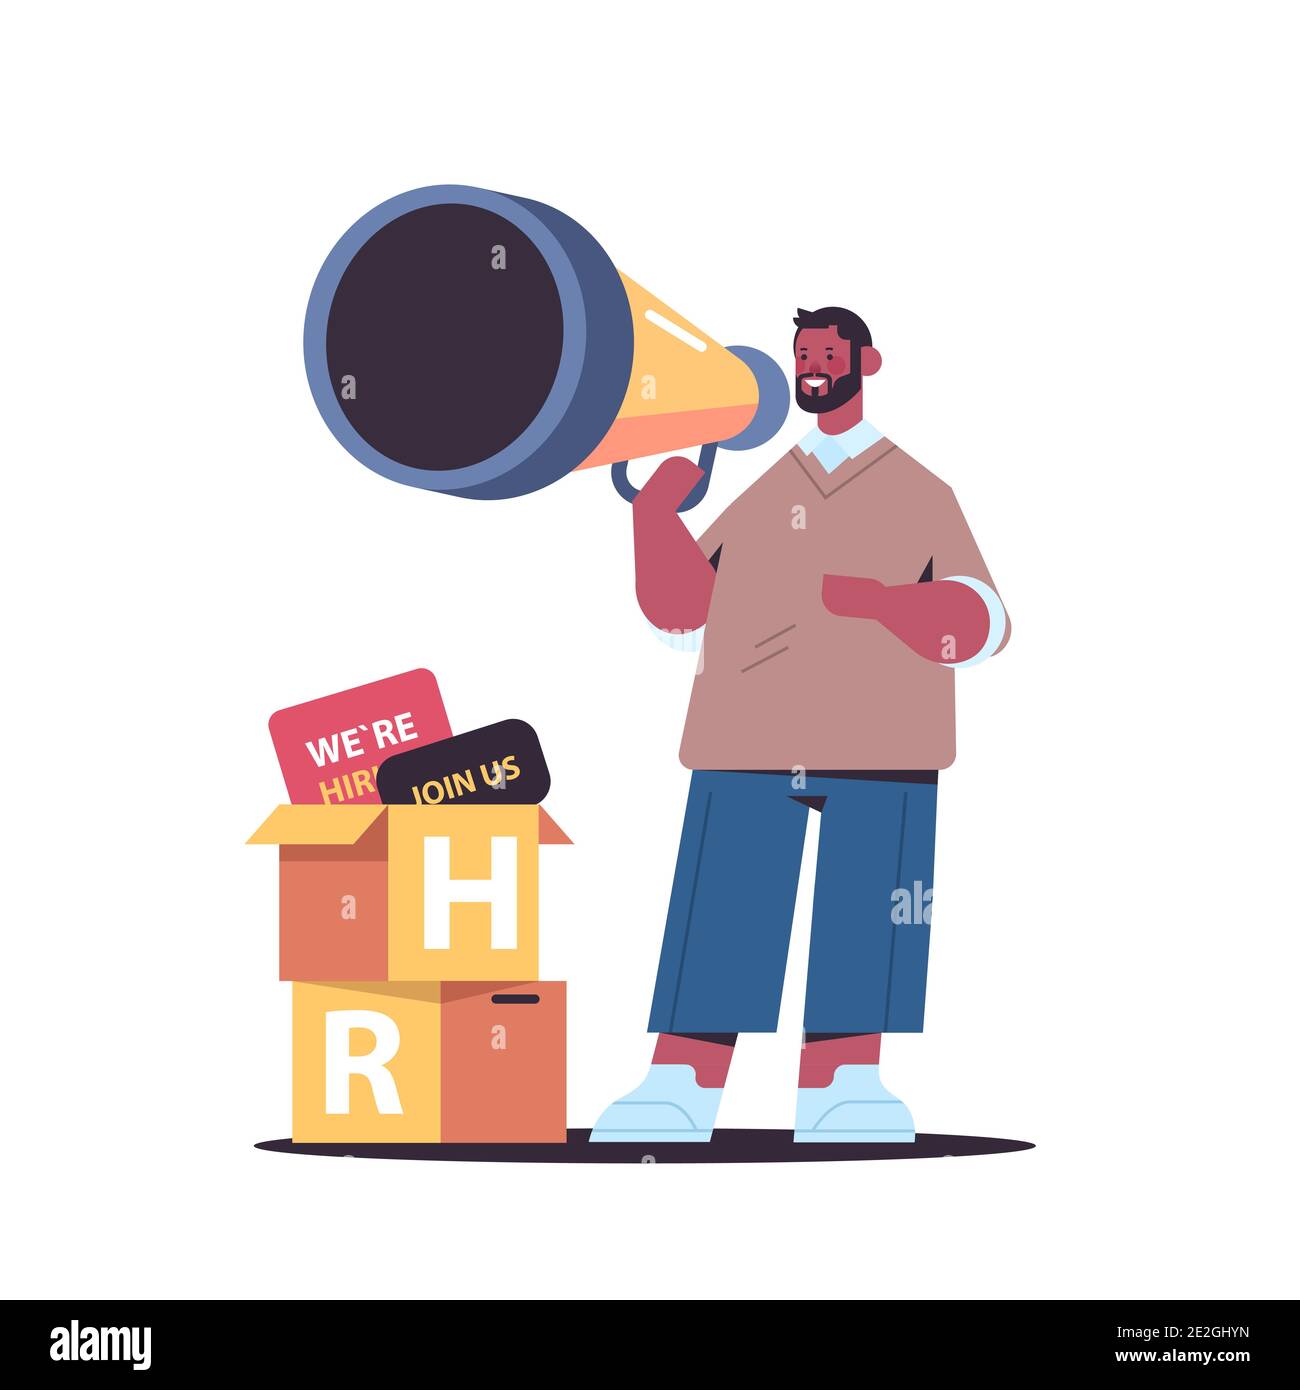 african american businessman manager holding loudspeaker we are hiring join us vacancy open recruitment HR industry concept full length vector illustration Stock Vector